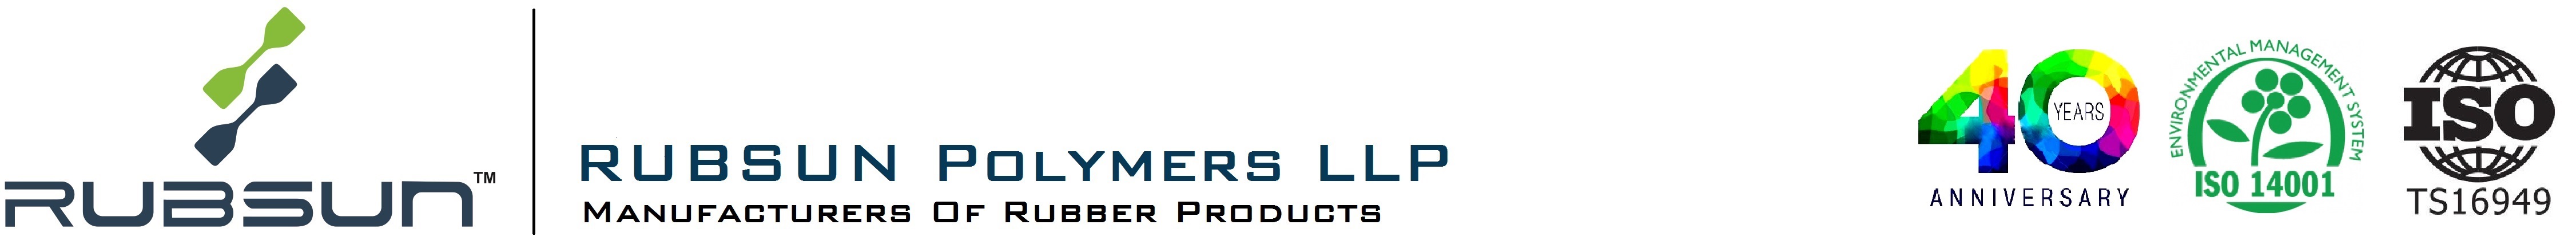 Rubsun Polymers LLP - Manufacturers of Rubber Products